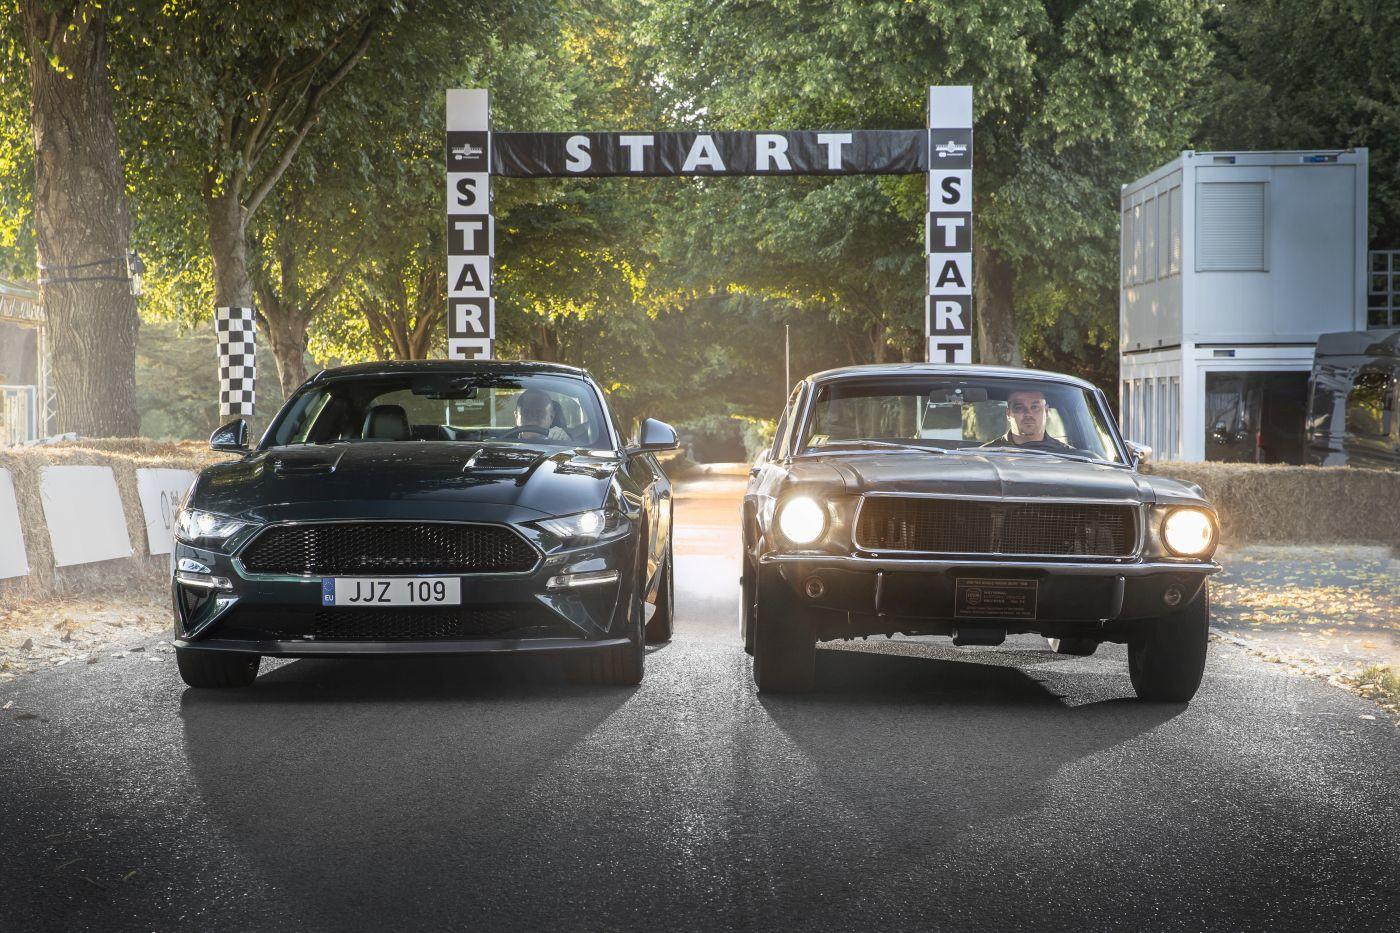 Ford Bullitt Mustang old and new at Goodwood